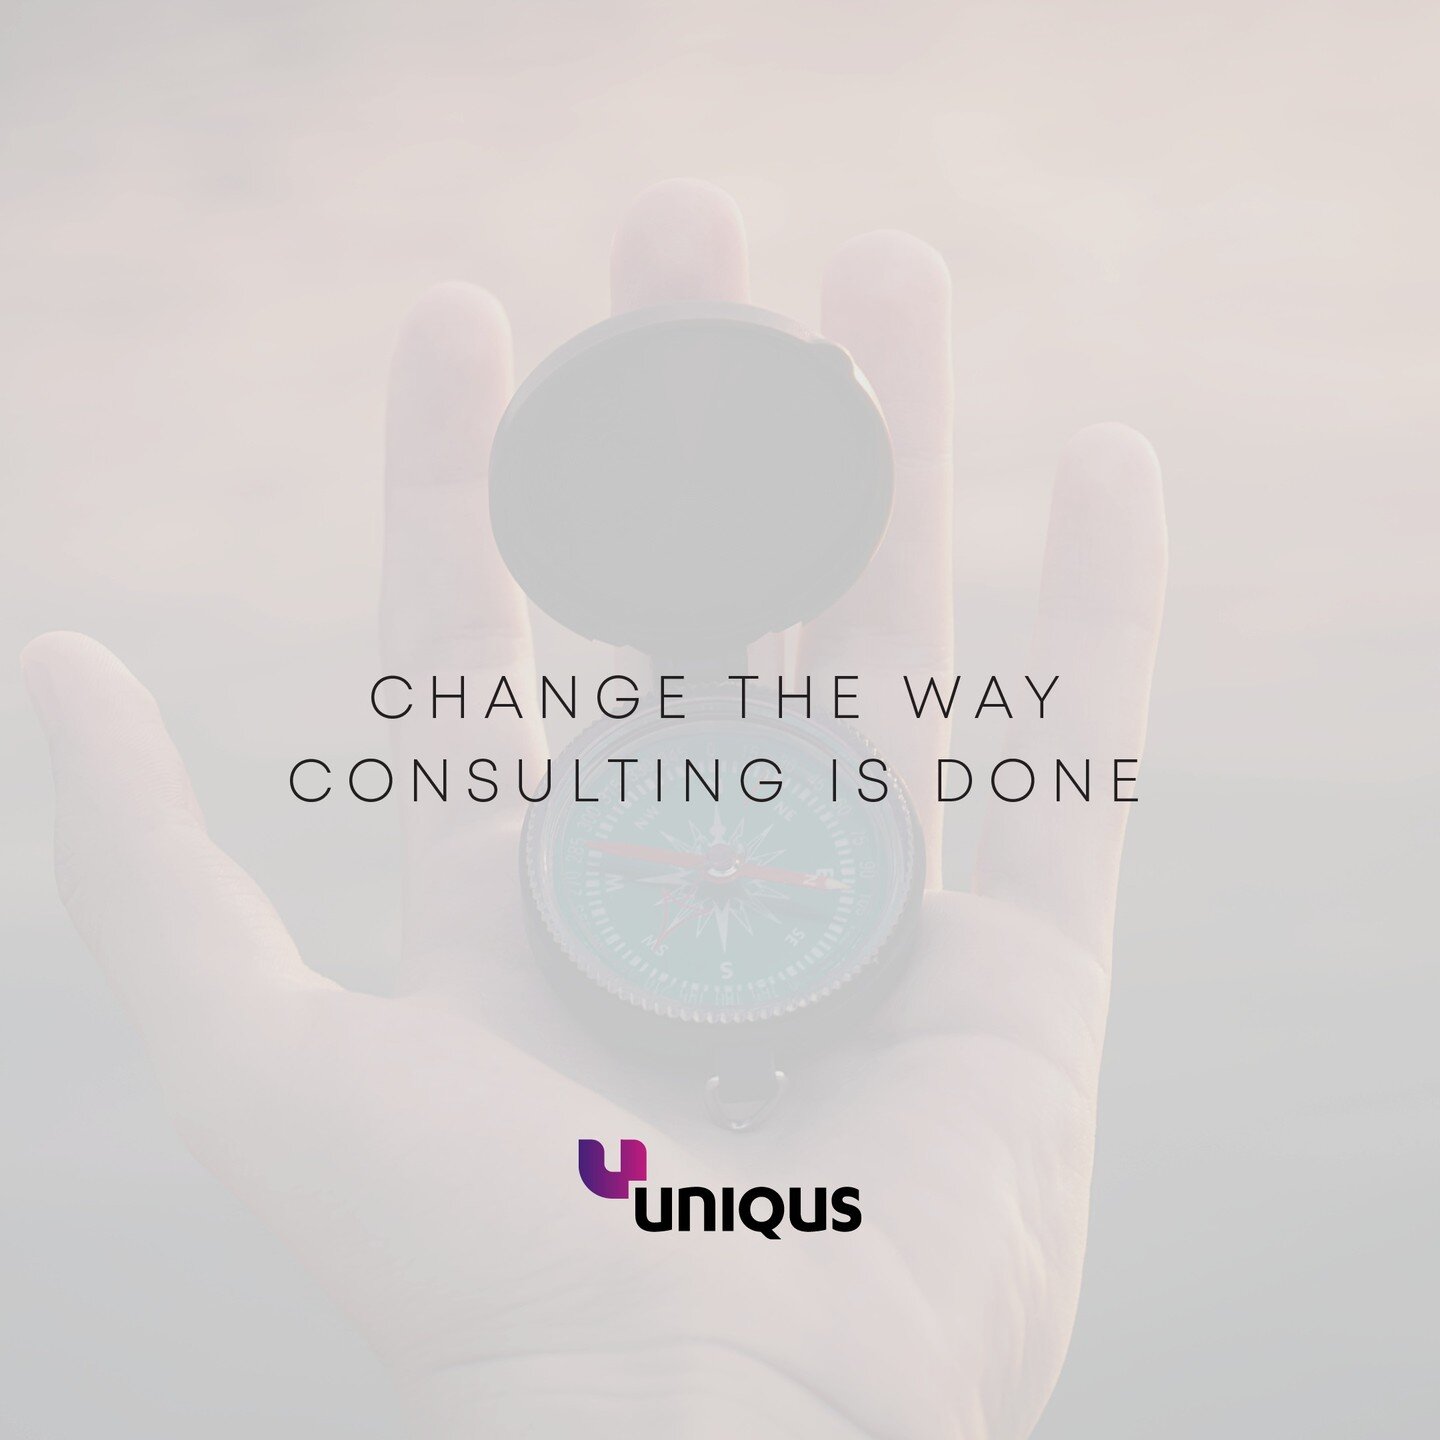 Brand strategy and visual identity for Uniqus

Uniqus aims to change the way consulting is done by taking a fresh new approach of &quot;Engage, Solve, Deliver, Evolve&quot;.

Lead by Jamil Khatri, Sandip Khetan and Anu Chaudhary, the brand strives to